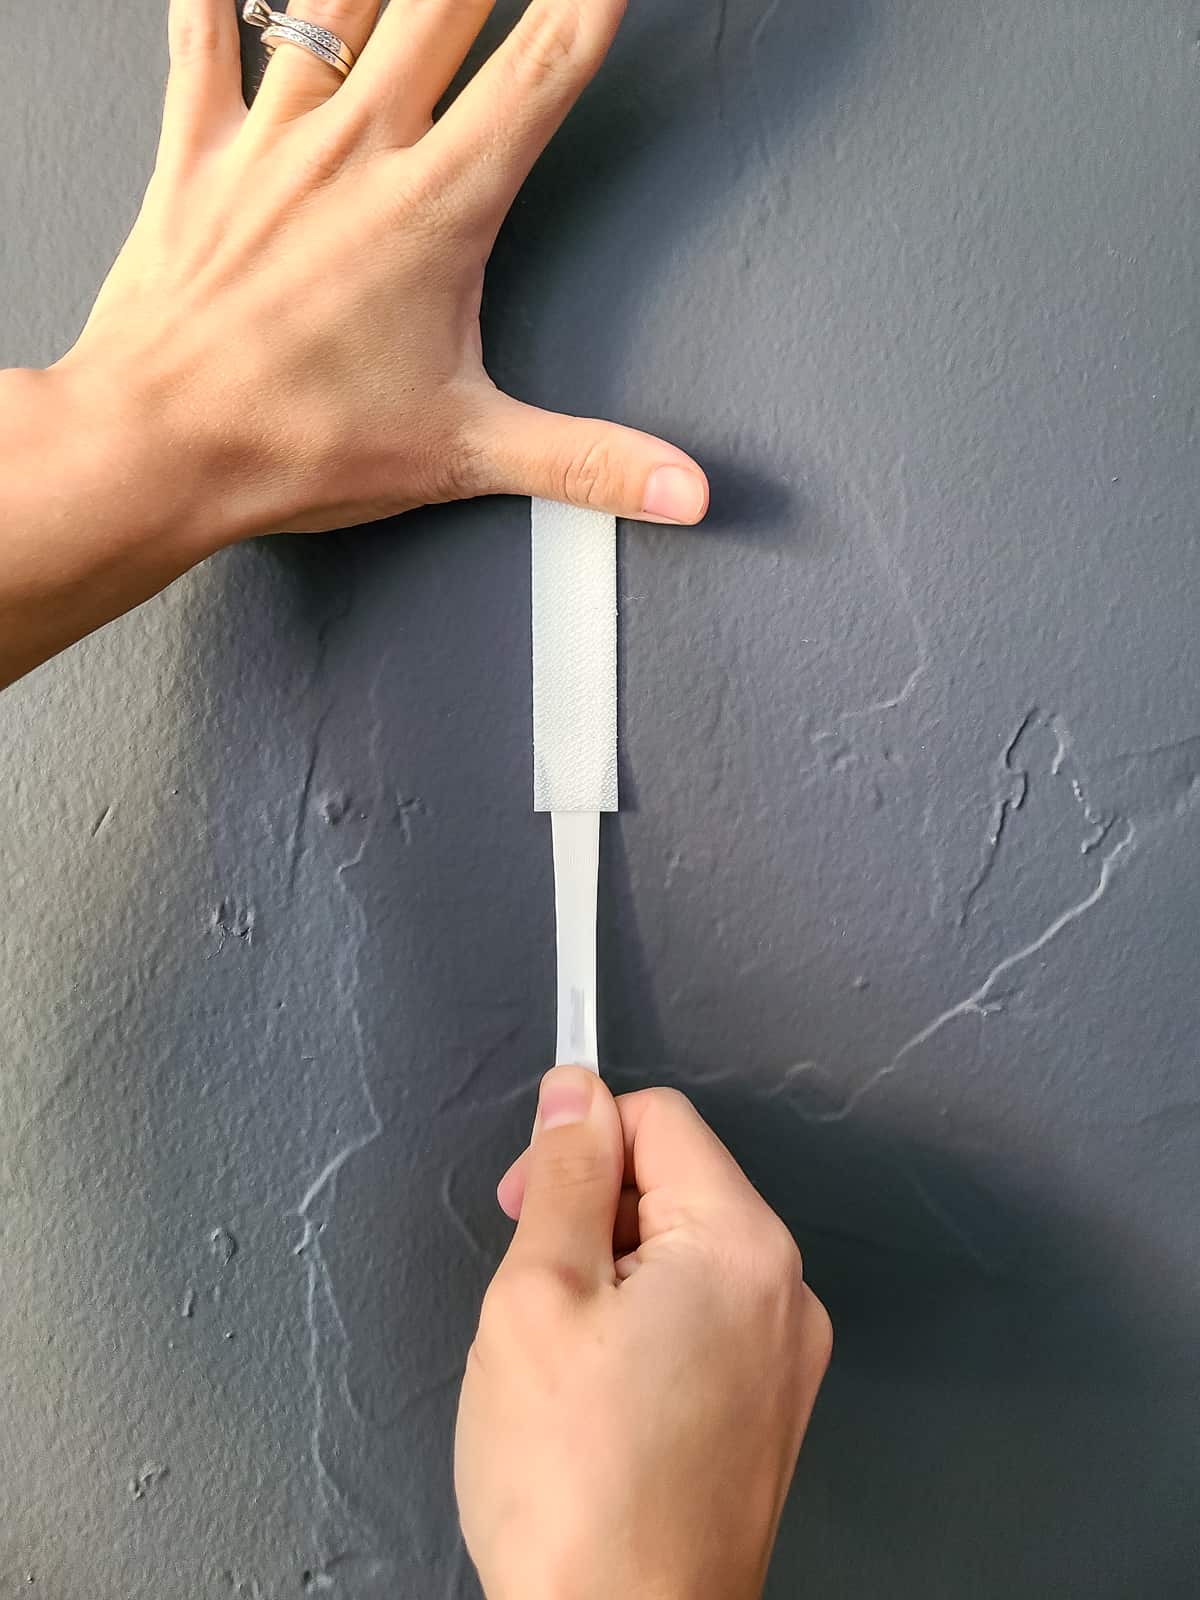 How To Remove Command Strips Without Damaging Walls - Making Manzanita